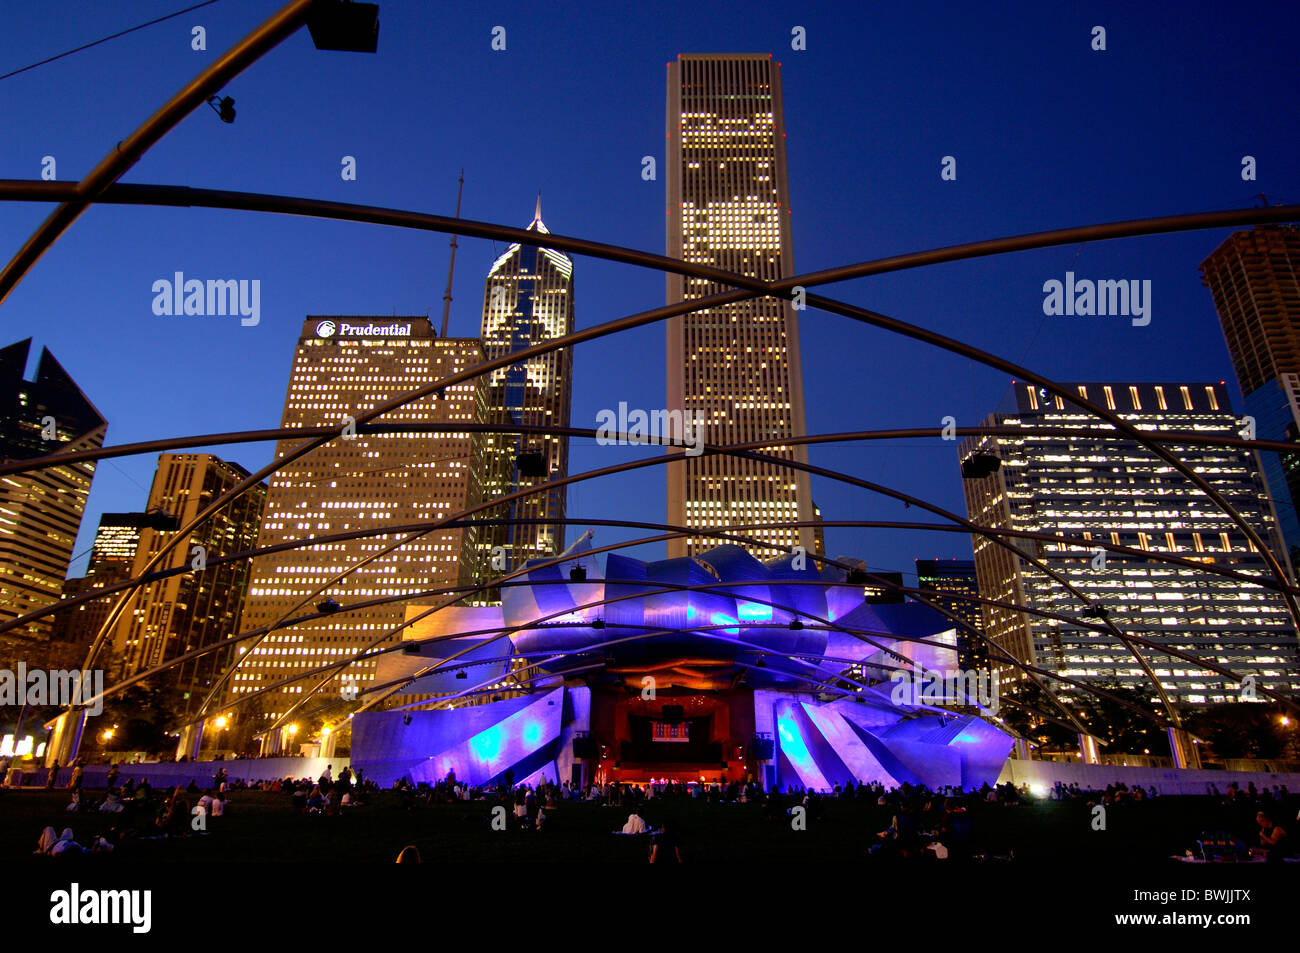 Jay Pritzker Pavilion from Frank Gehry at night night architecture moulder art skill culture person dusk tw Stock Photo